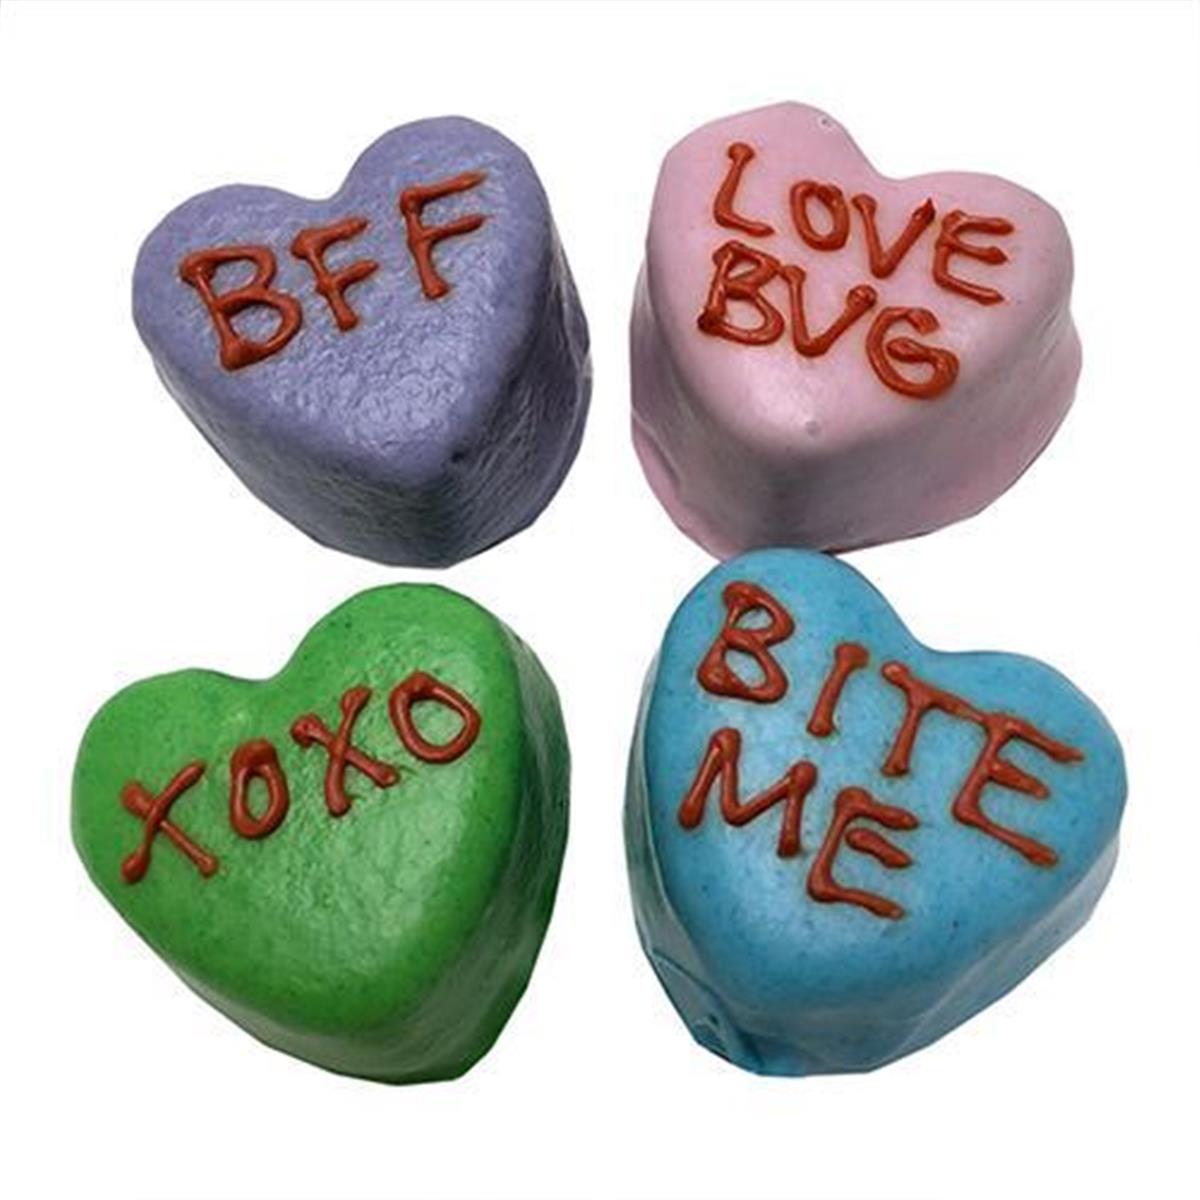 Bkhecb Candy Heart Cake Bites - Case Of 12